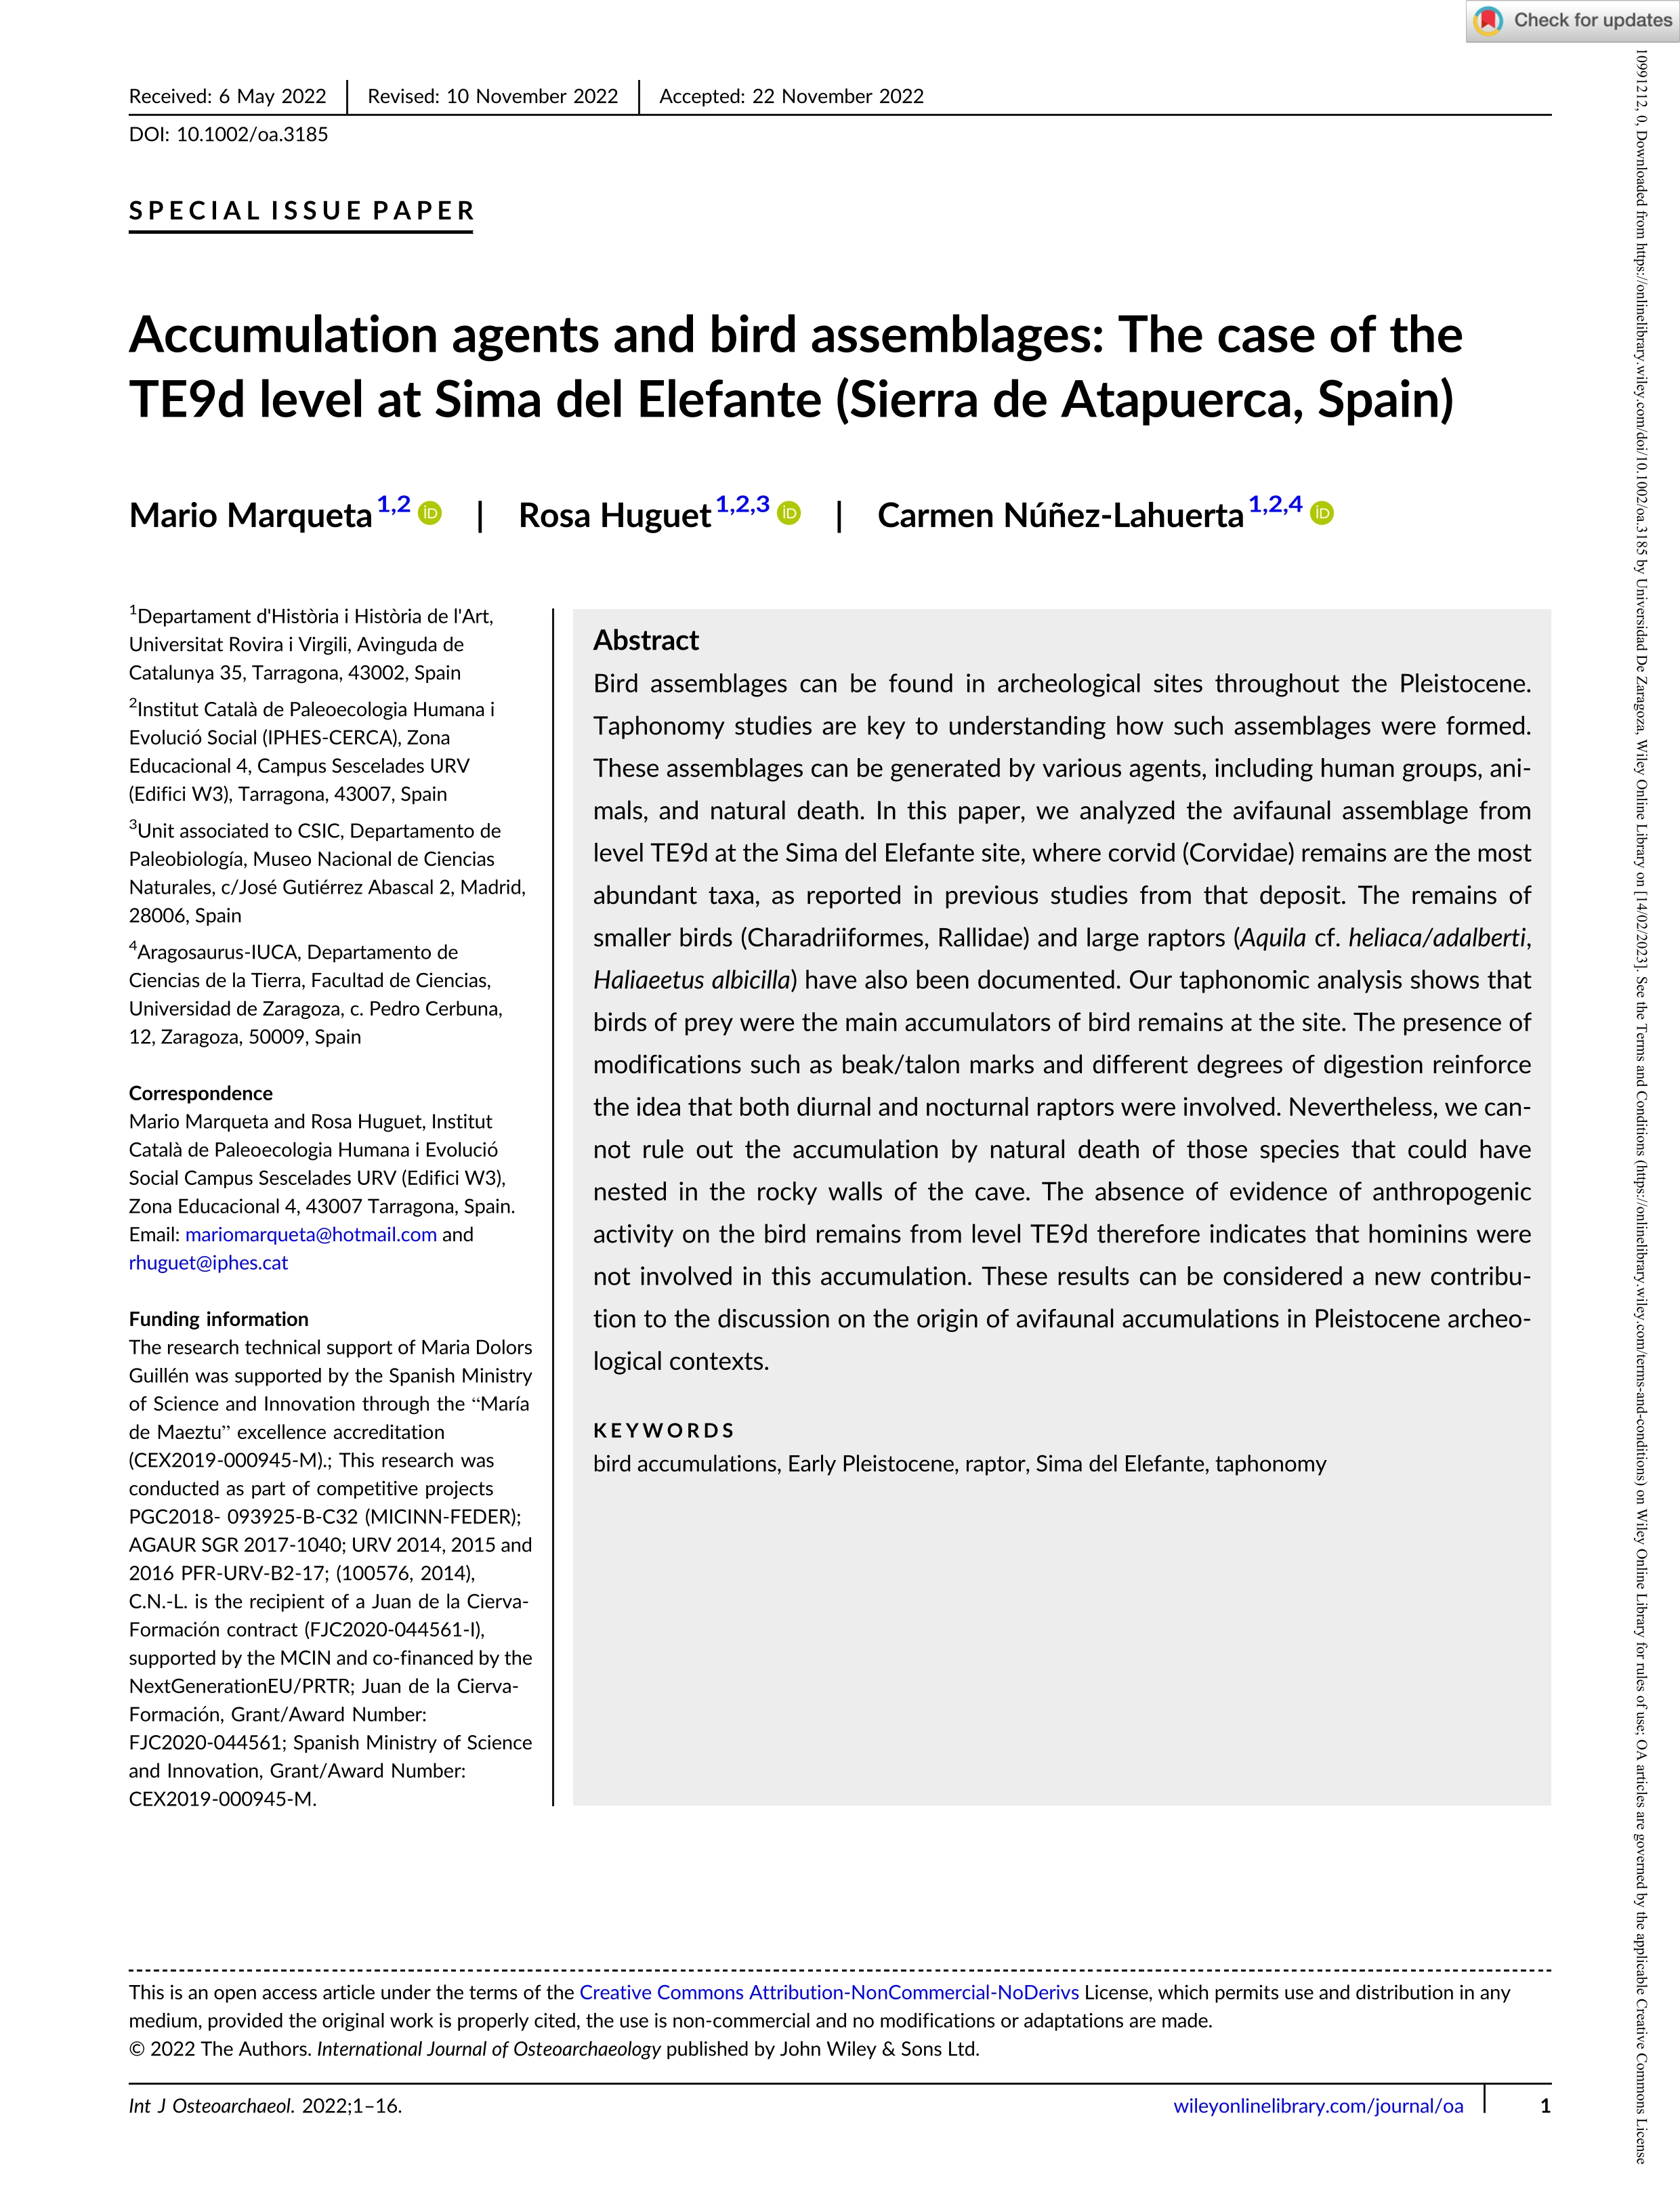 Accumulation agents and bird assemblages: The case of the TE9d level at Sima del Elefante (Sierra de Atapuerca, Spain)